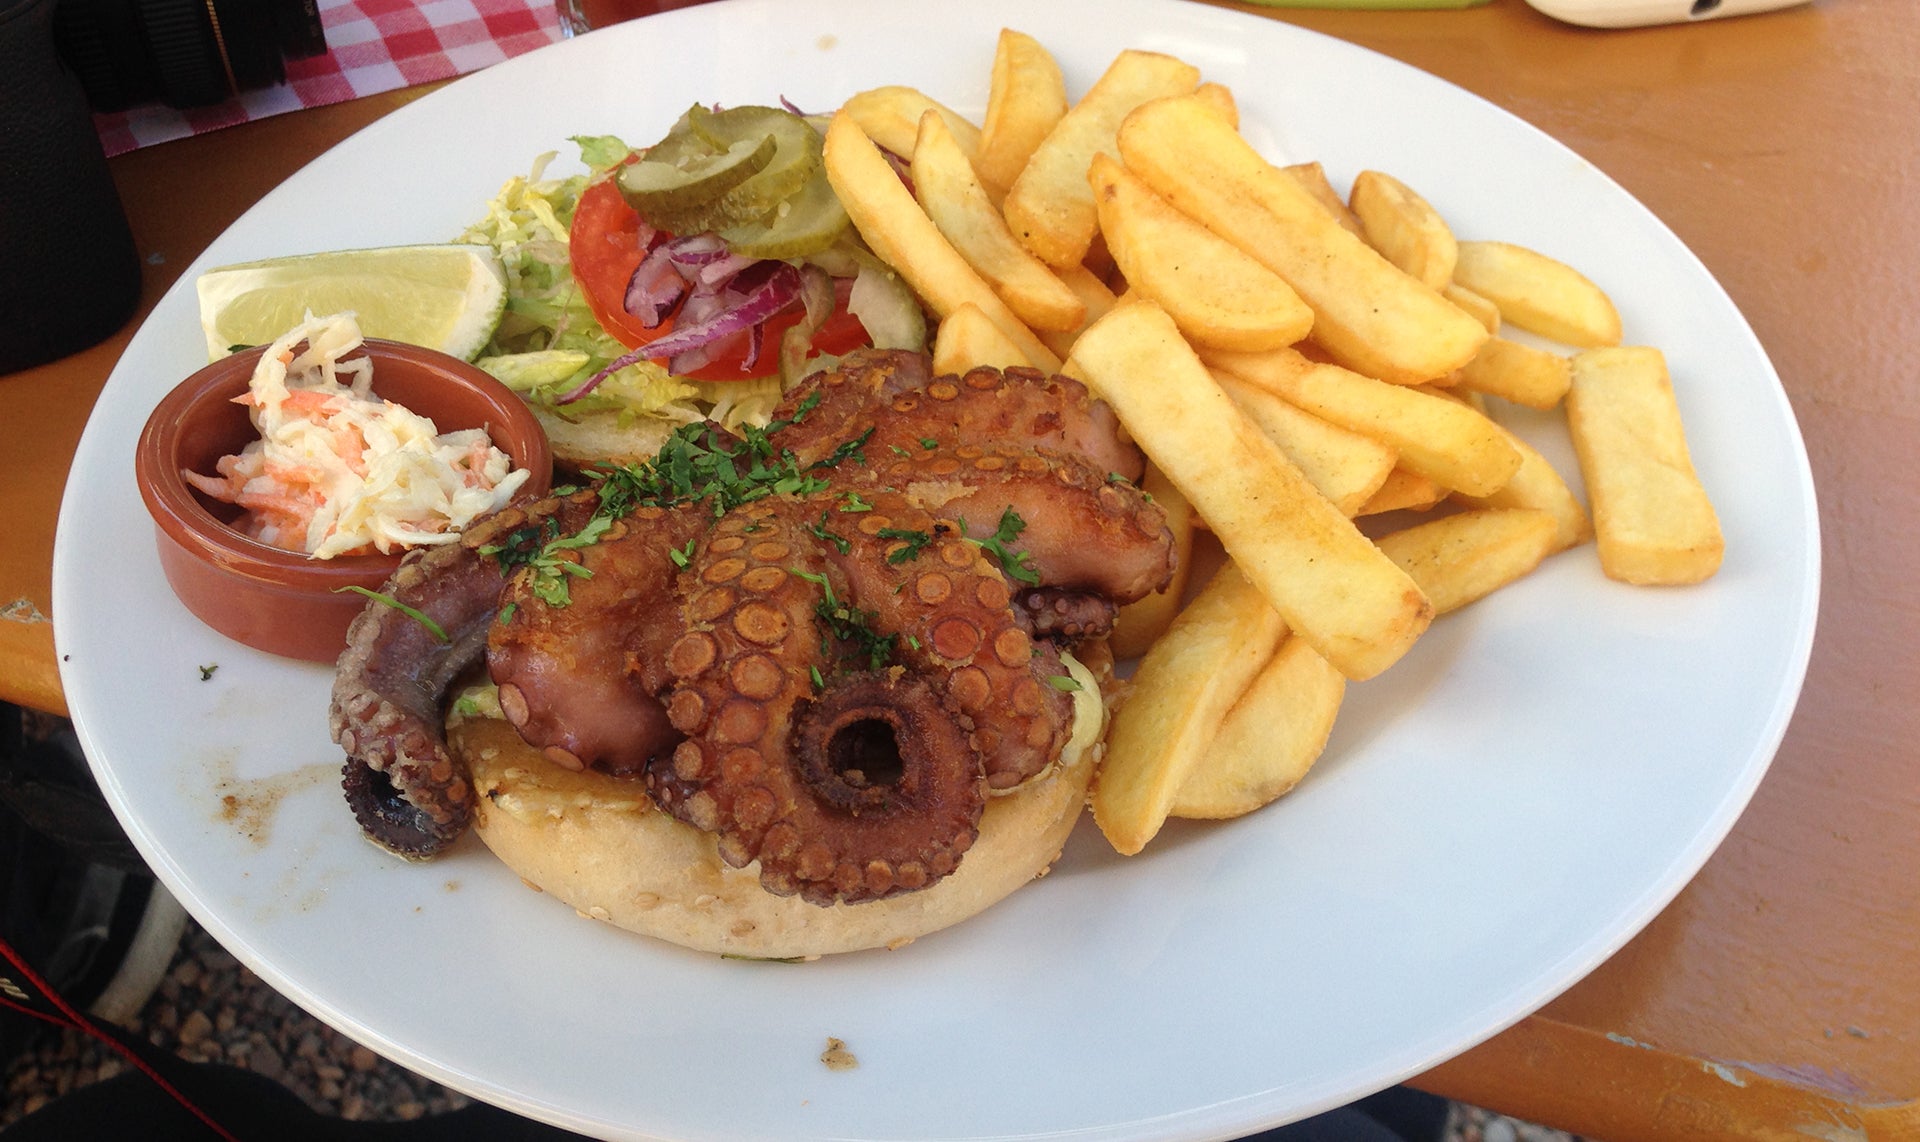 Infamous Octopus Burger We Posted on Social Media